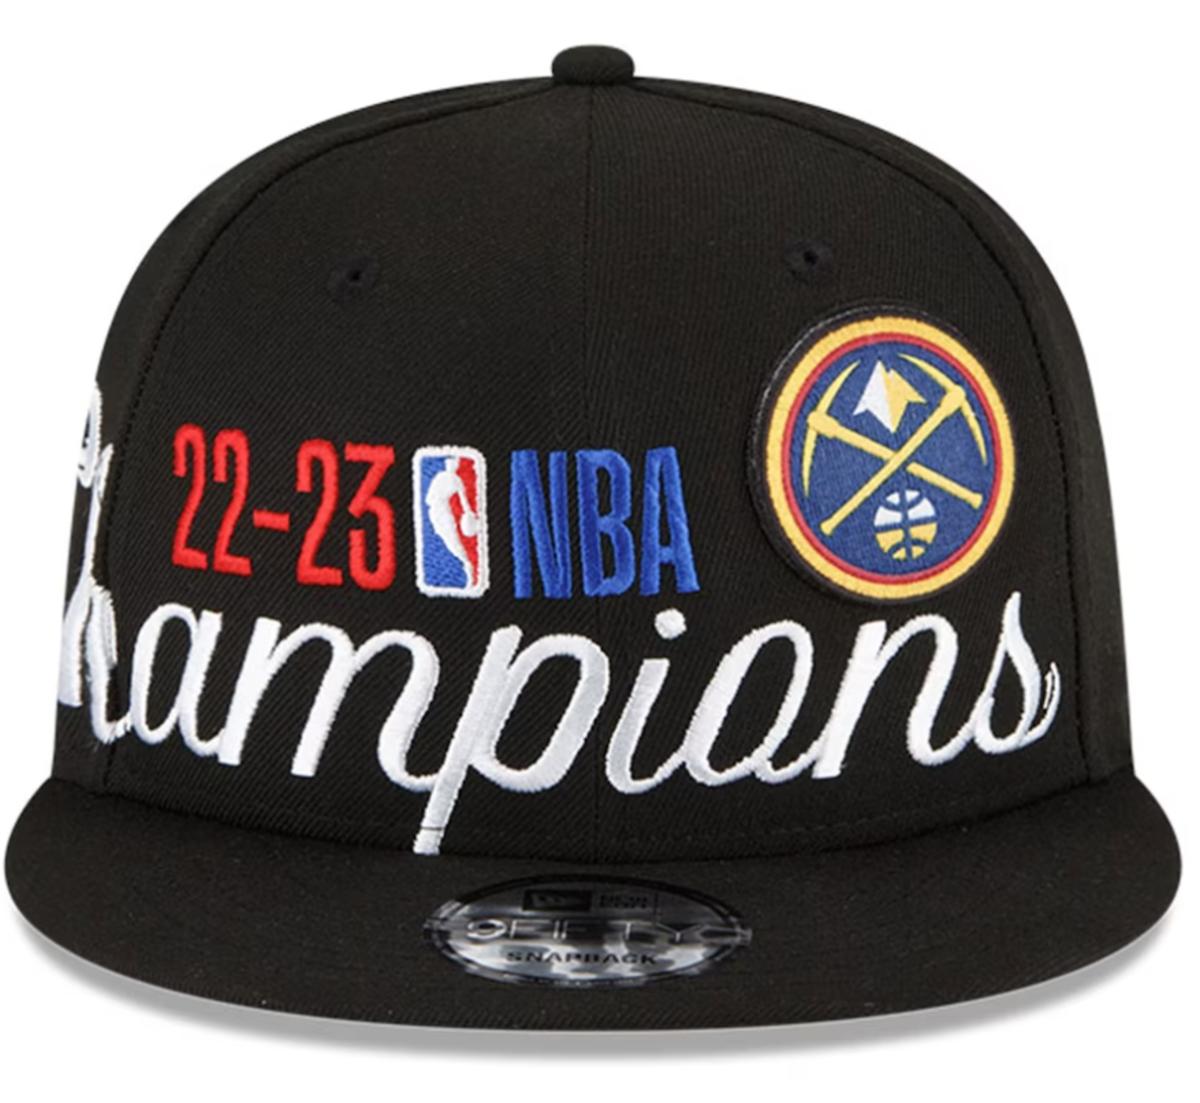 Denver Nuggets NBA Champions, how to buy your Nuggets Championship gear FanNation A part of